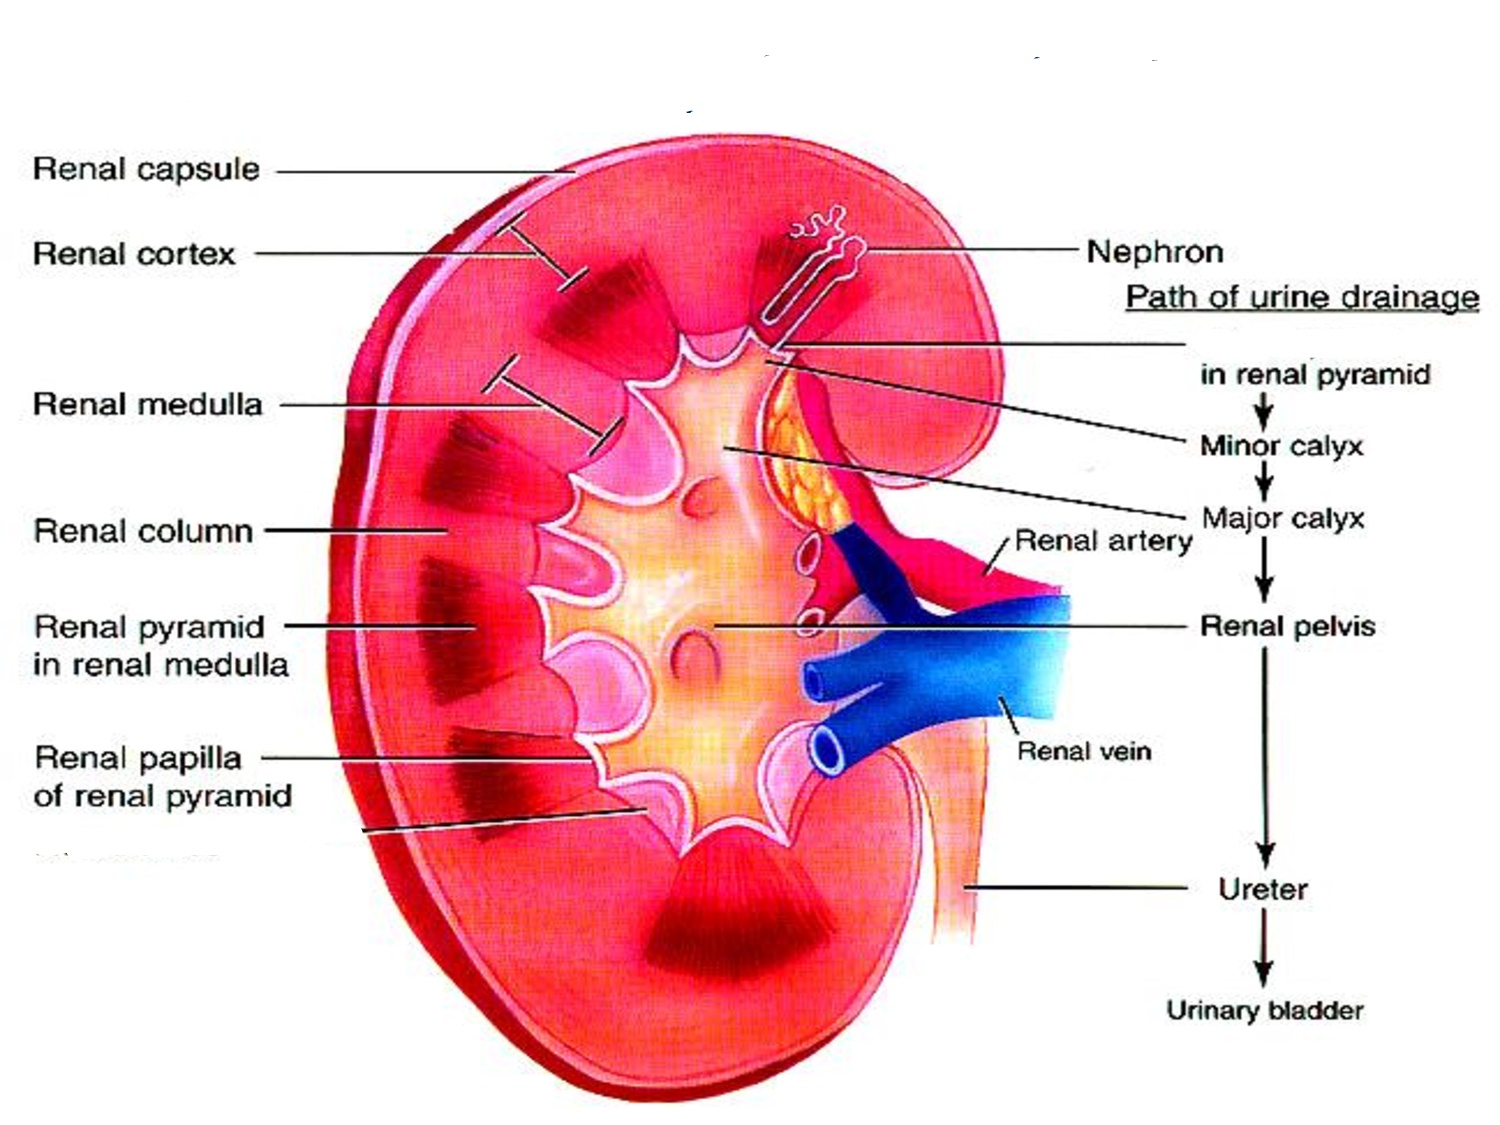 the structure of kidney hilum